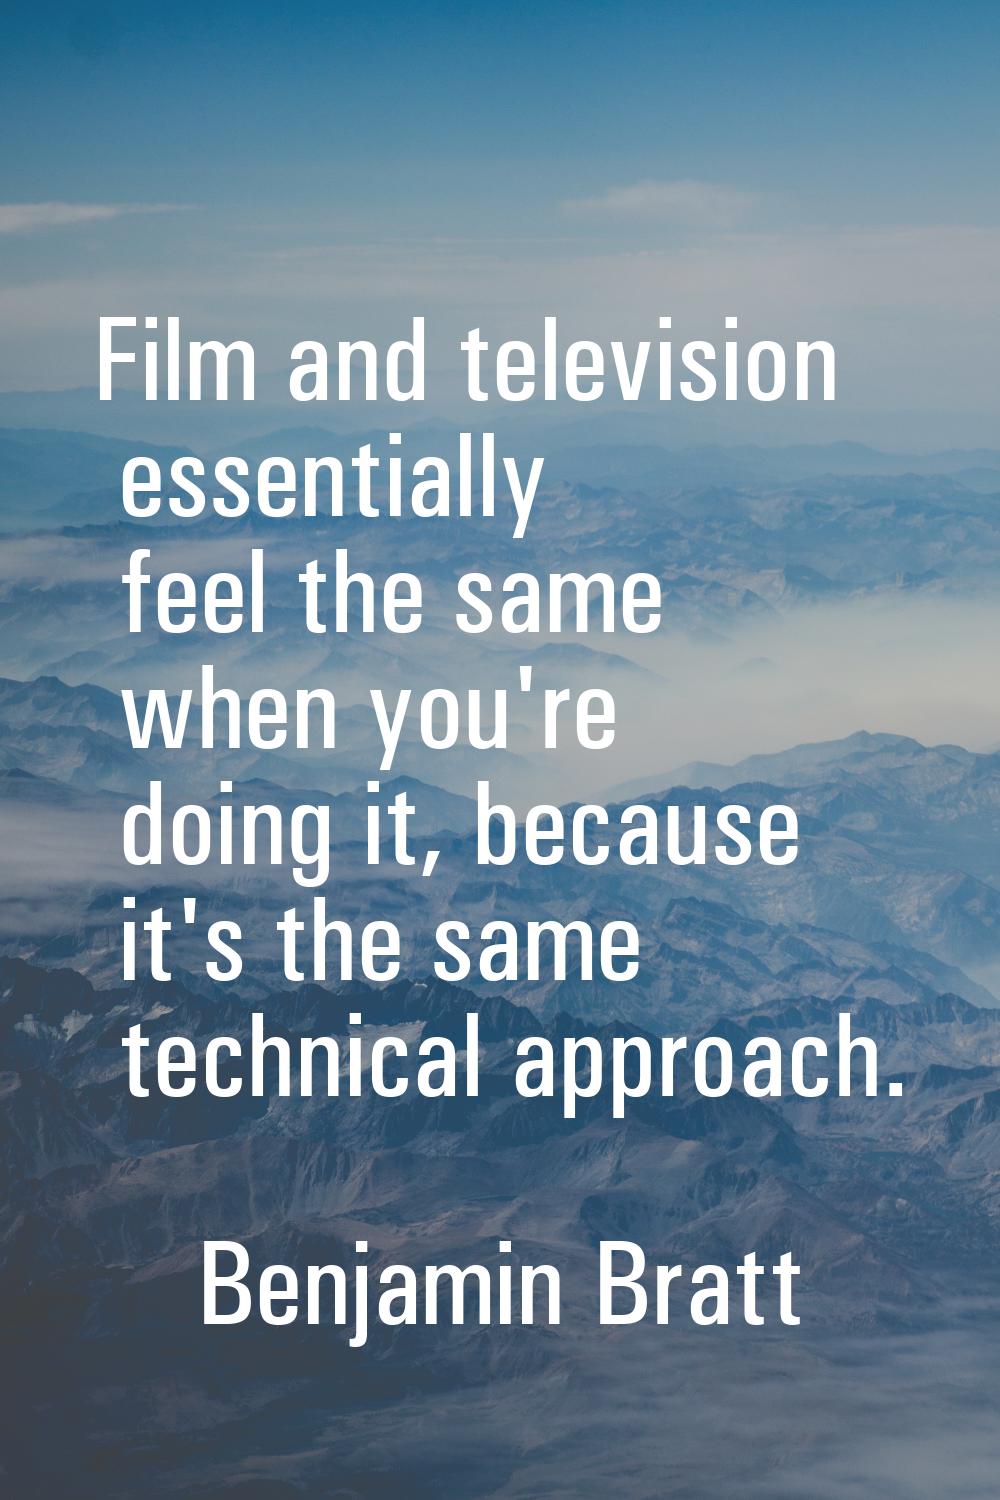 Film and television essentially feel the same when you're doing it, because it's the same technical